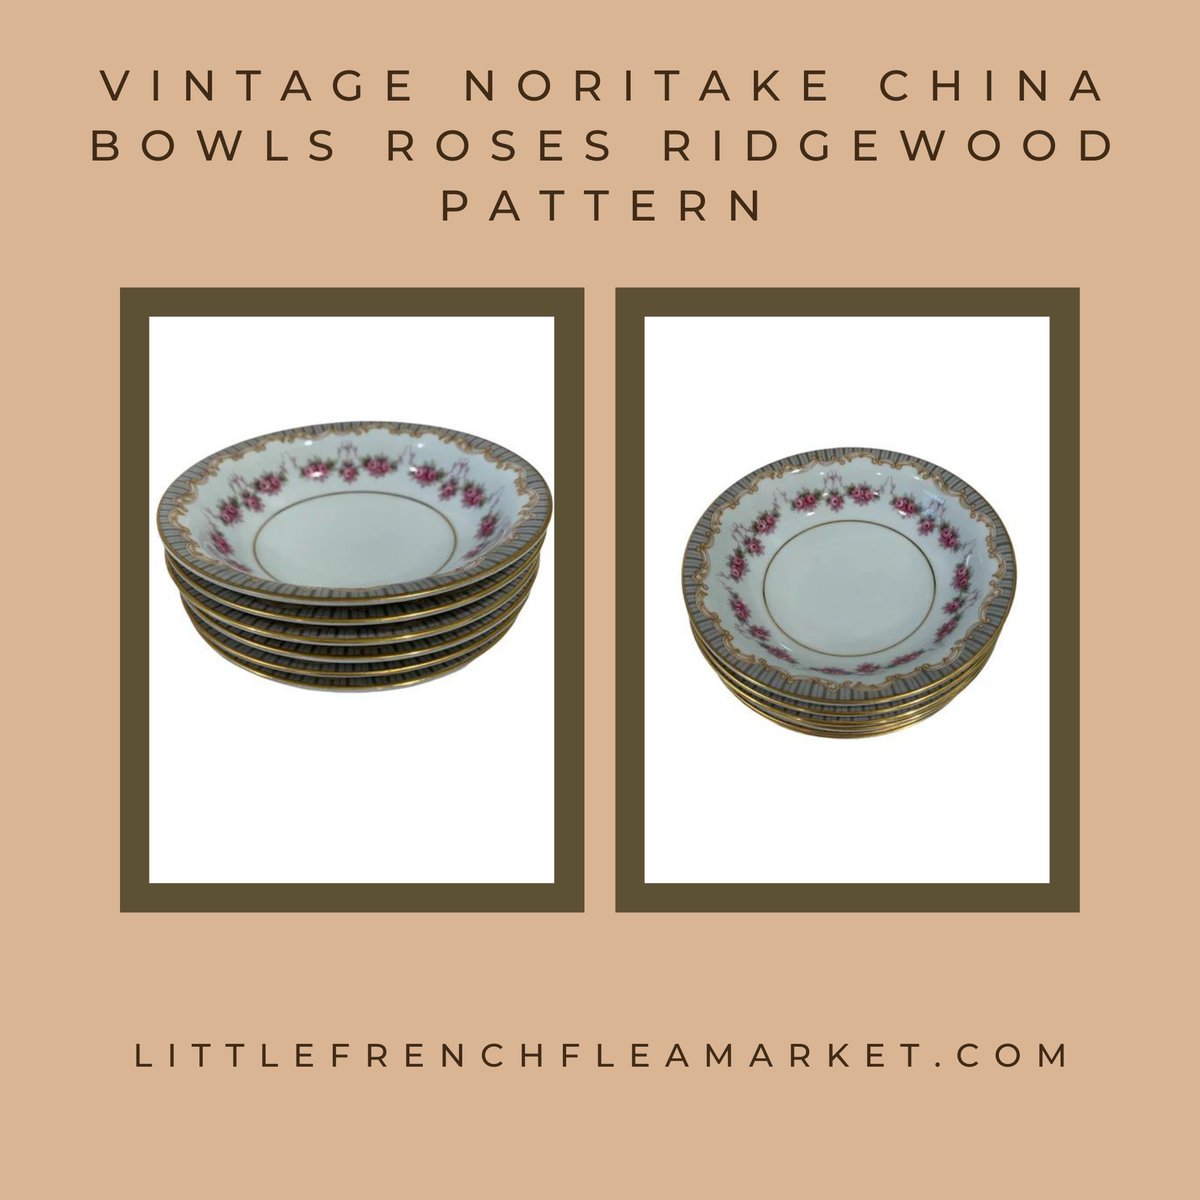 We have a set of vintage Noritake China bowls, Roses pattern.

✨Order now and get 20% off if you use the code 'Shop20' at the checkout!

Click the link below! 
littlefrenchfleamarket.com/collections/po…

#noritakechina #dinnerparty #vintage #rosespattern